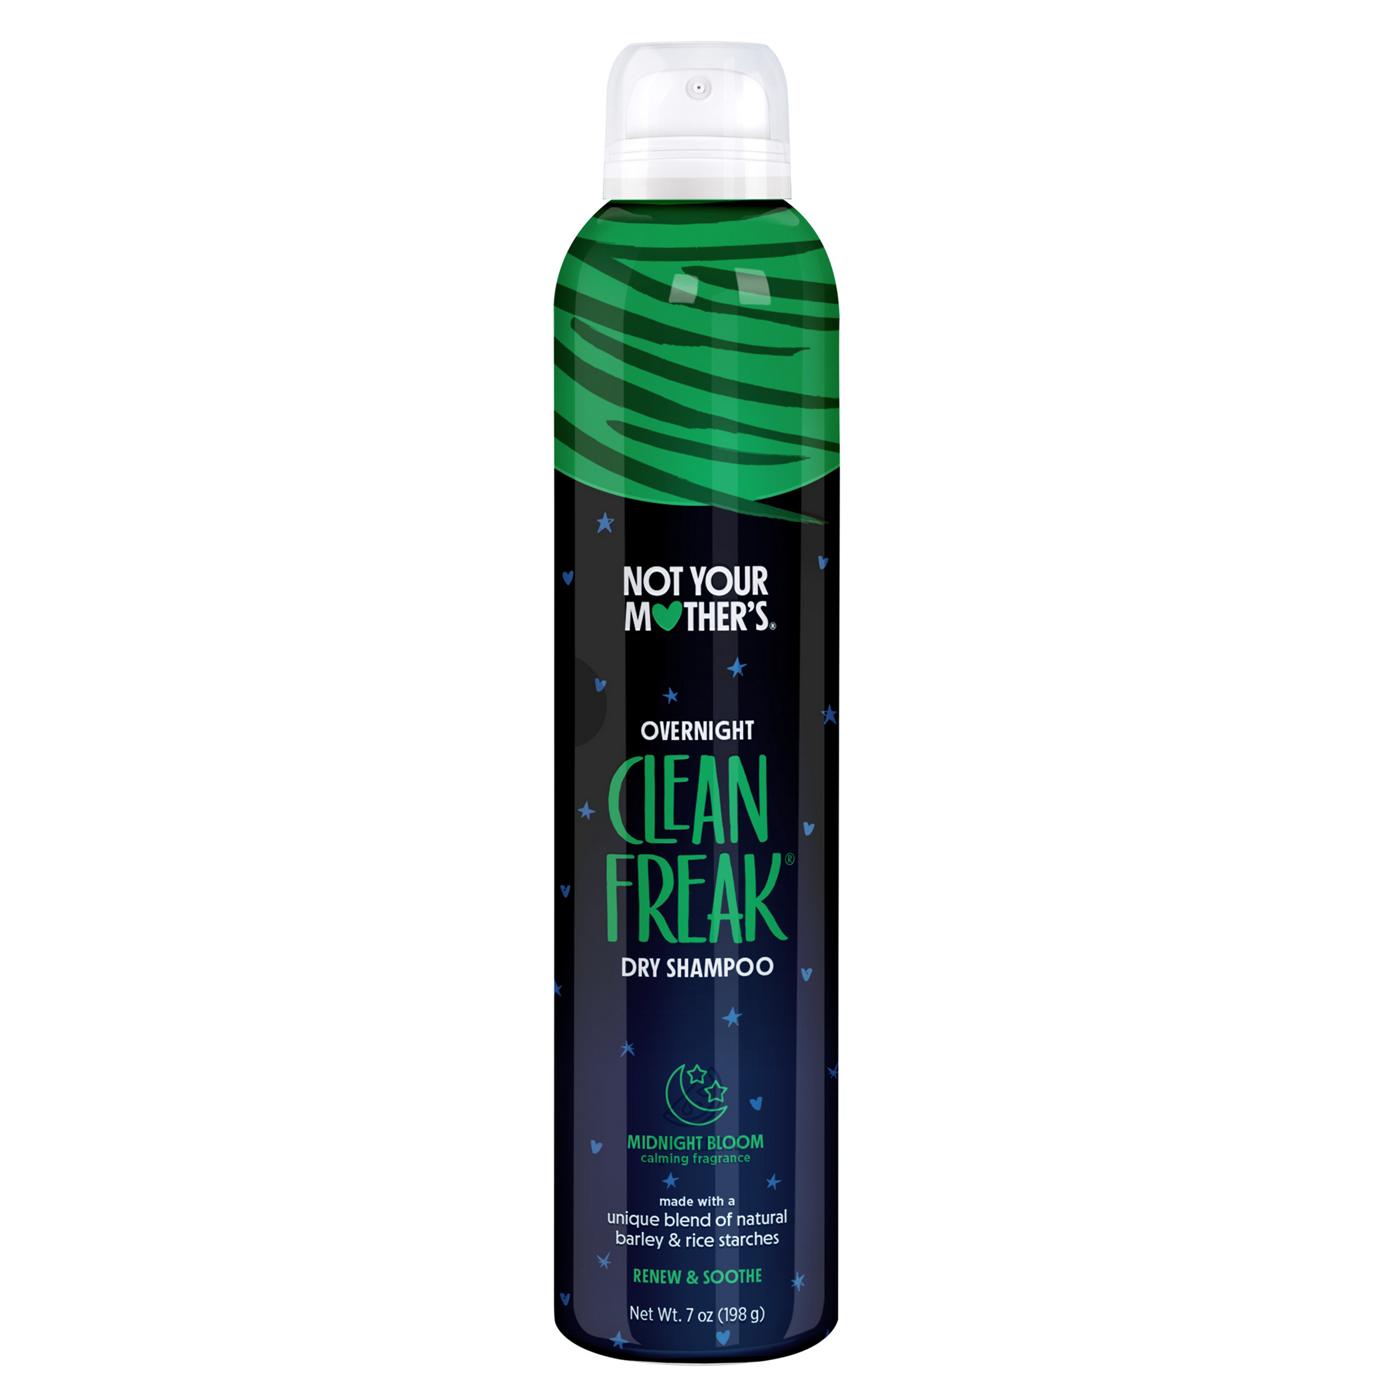 Not Your Mother's Clean Freak Overnight Dry Shampoo; image 1 of 2